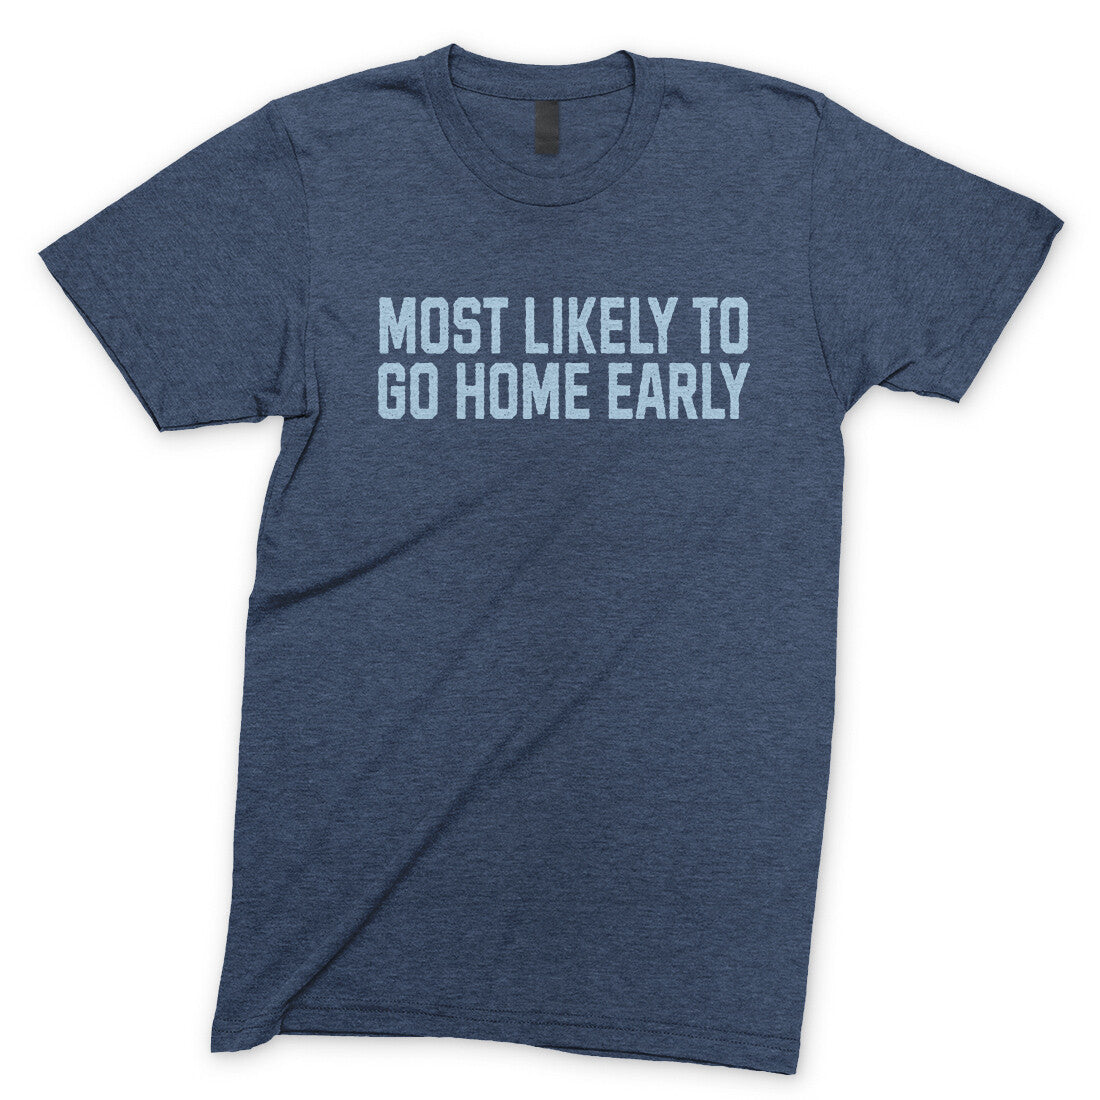 Most Likely to Go Home Early in Navy Heather Color